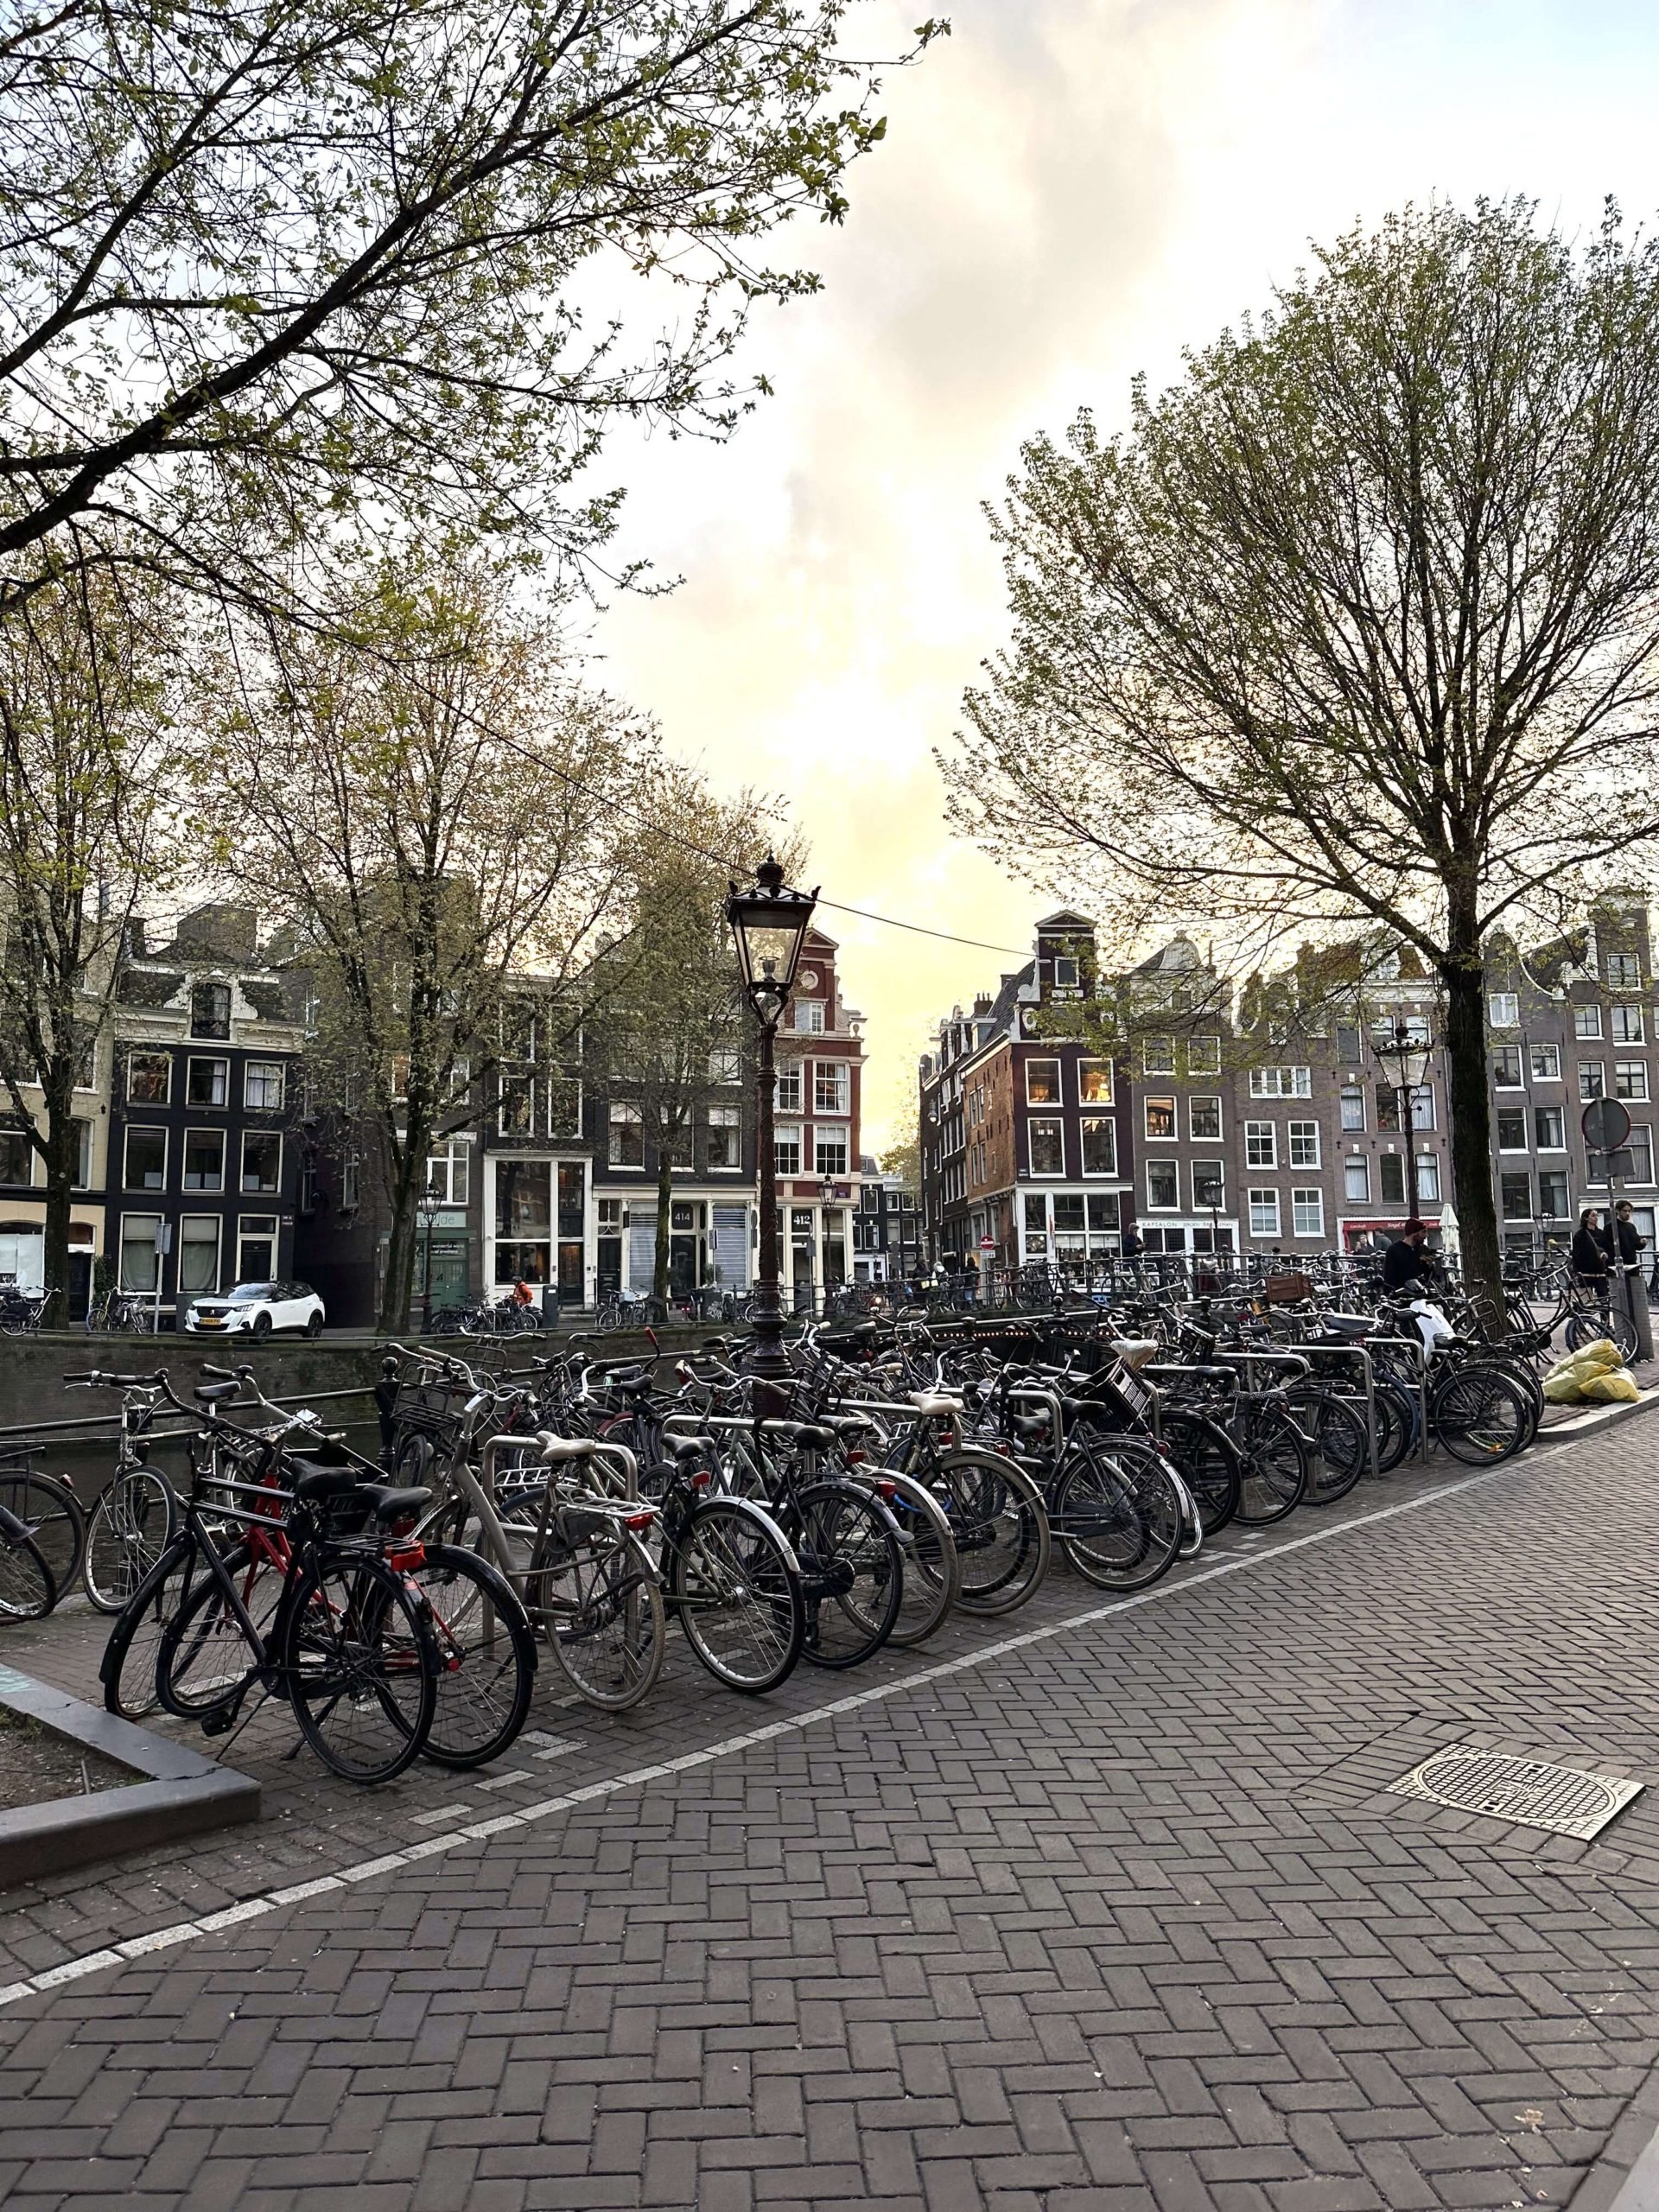 Rows of bikes on a street in Amsterdam.